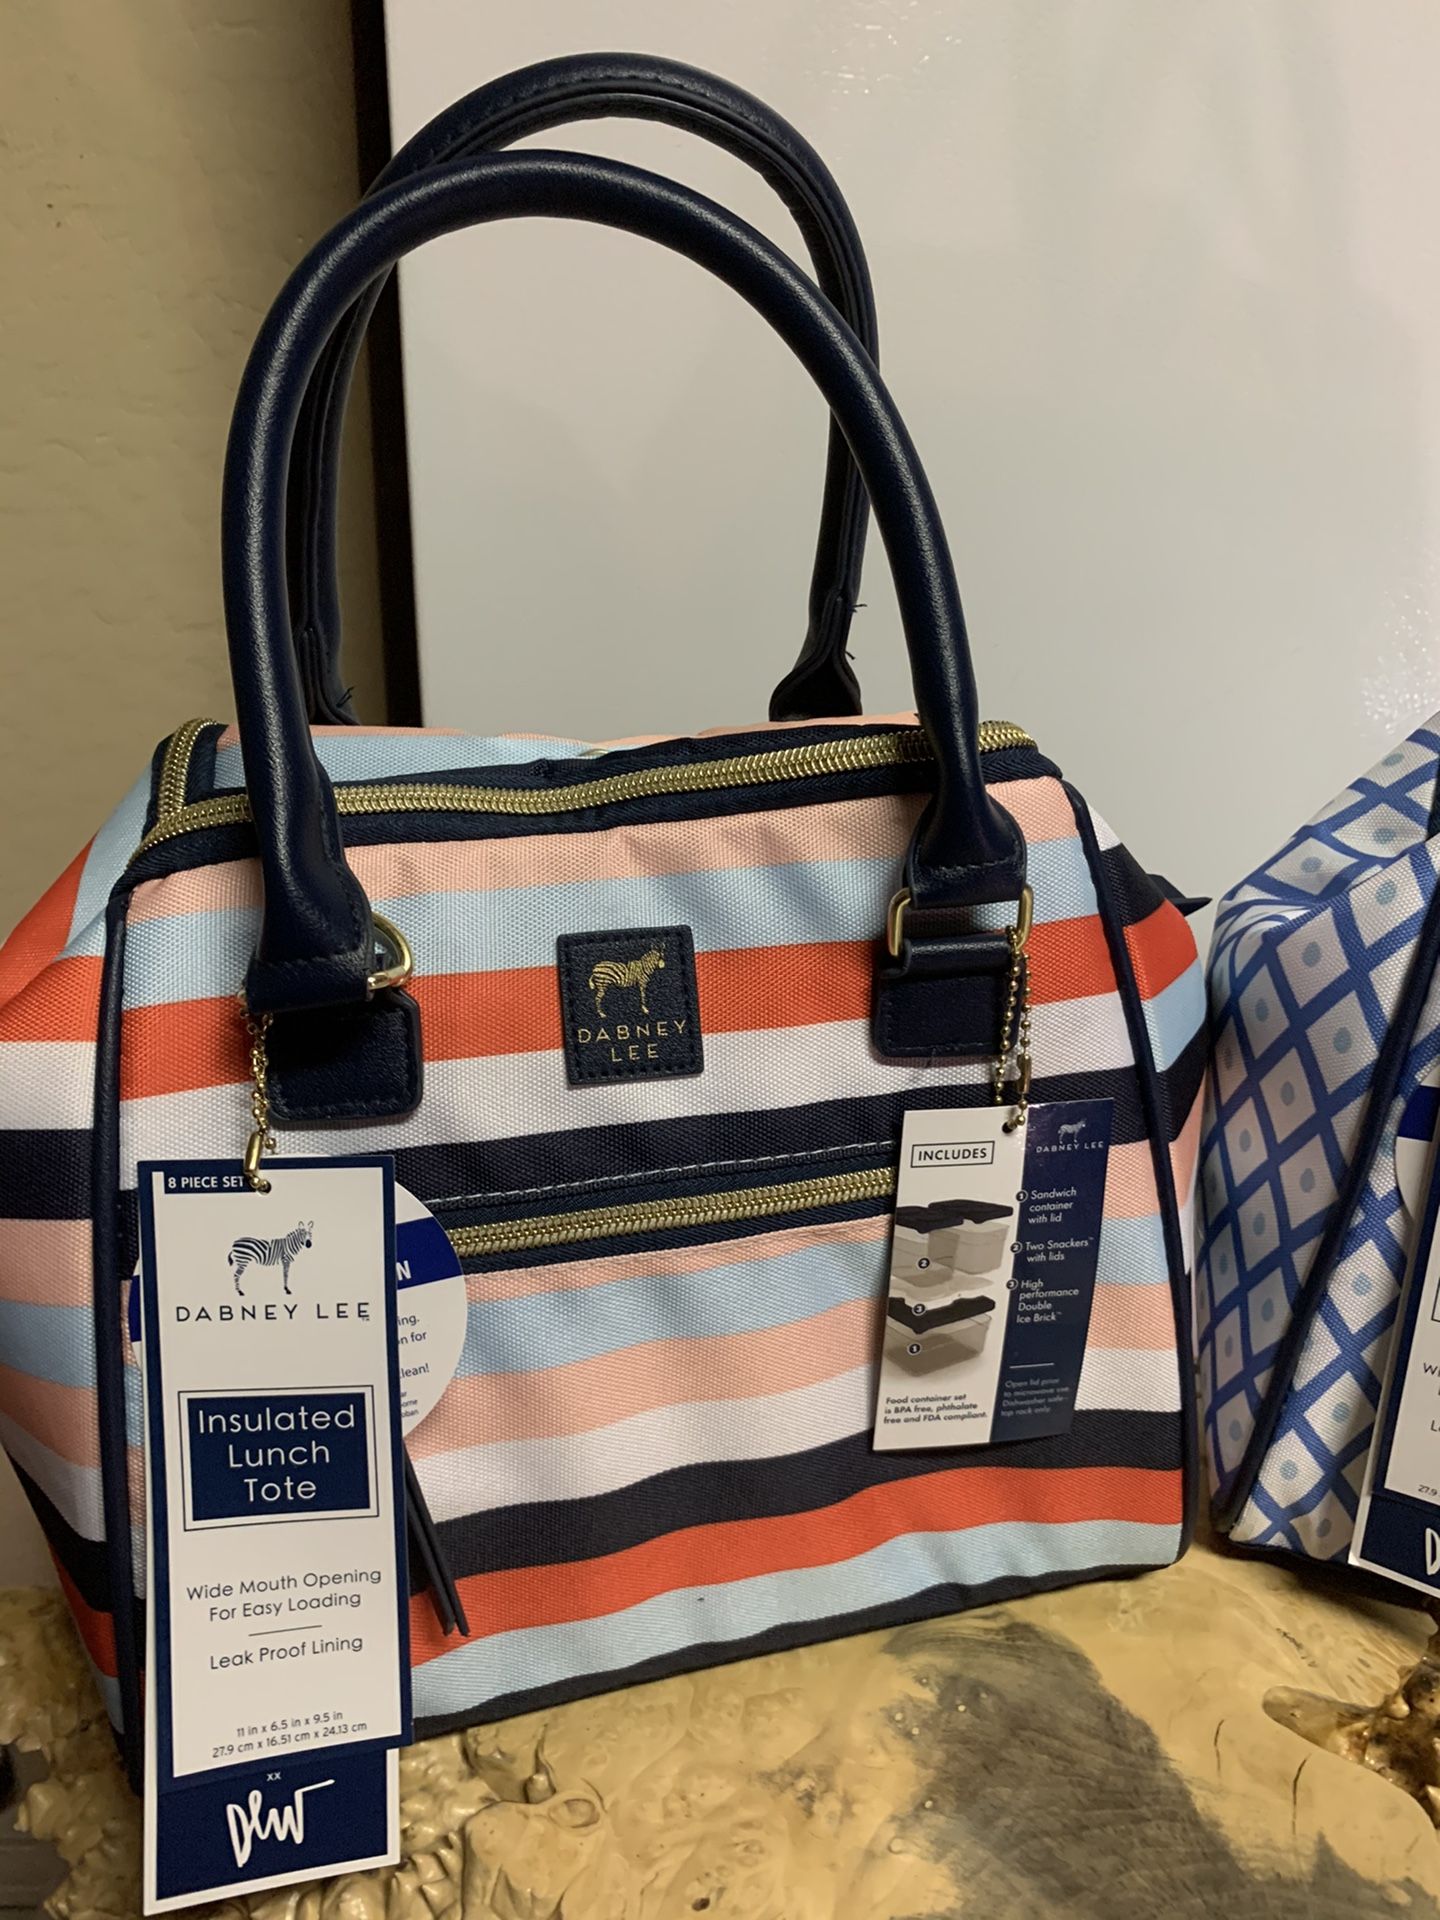 Insulated lunch bag tote with should strap and containers